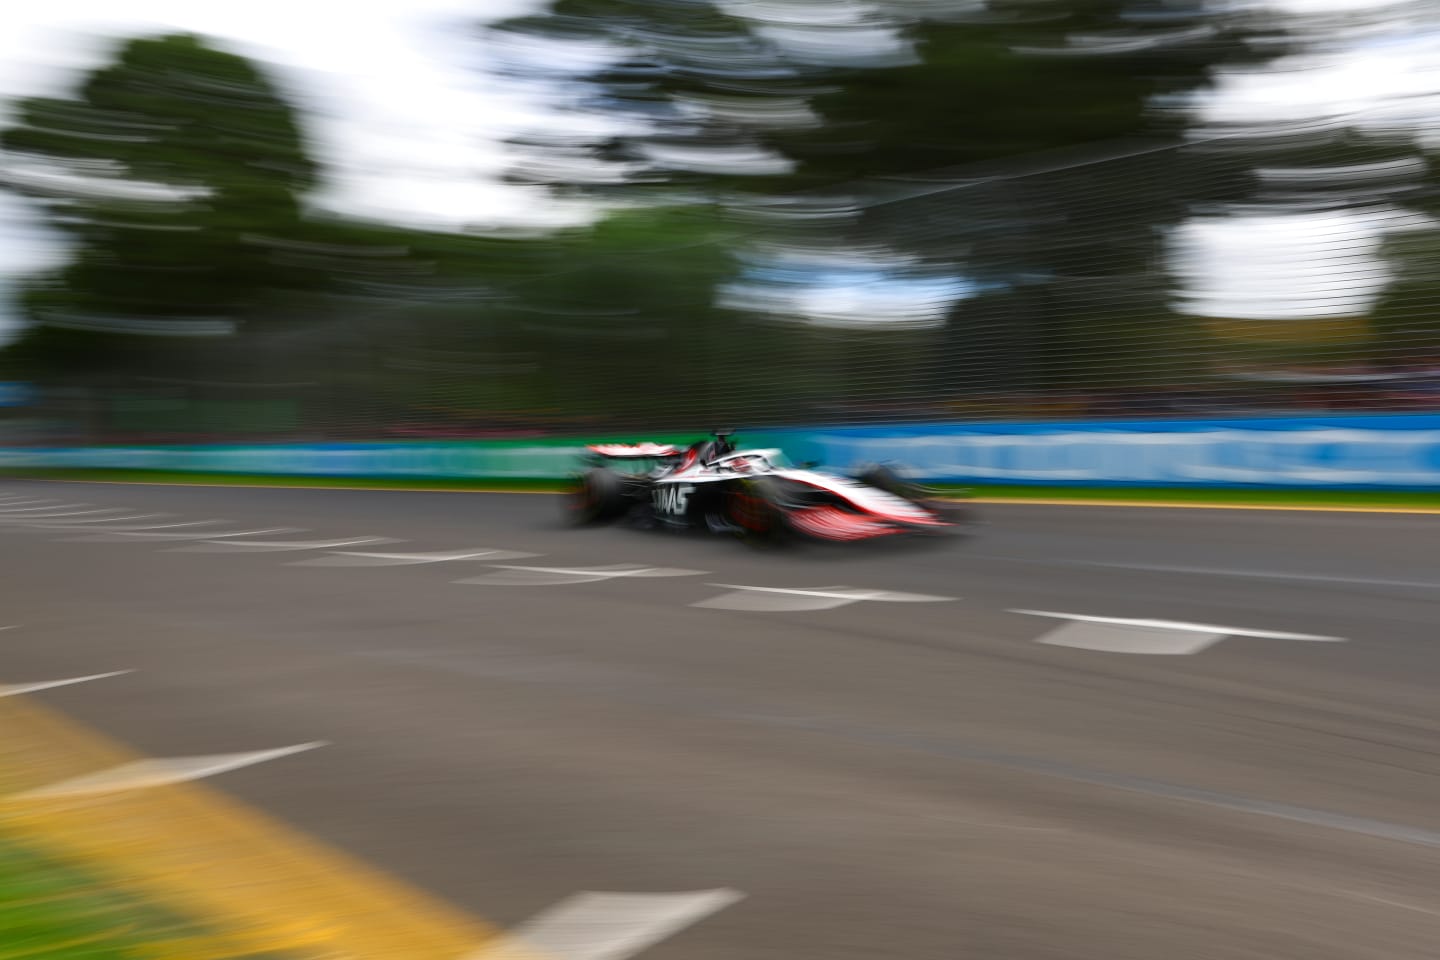 MELBOURNE, AUSTRALIA - APRIL 01: Kevin Magnussen of Denmark driving the (20) Haas F1 VF-23 Ferrari on track during final practice ahead of the F1 Grand Prix of Australia at Albert Park Grand Prix Circuit on April 01, 2023 in Melbourne, Australia. (Photo by Mark Thompson/Getty Images)